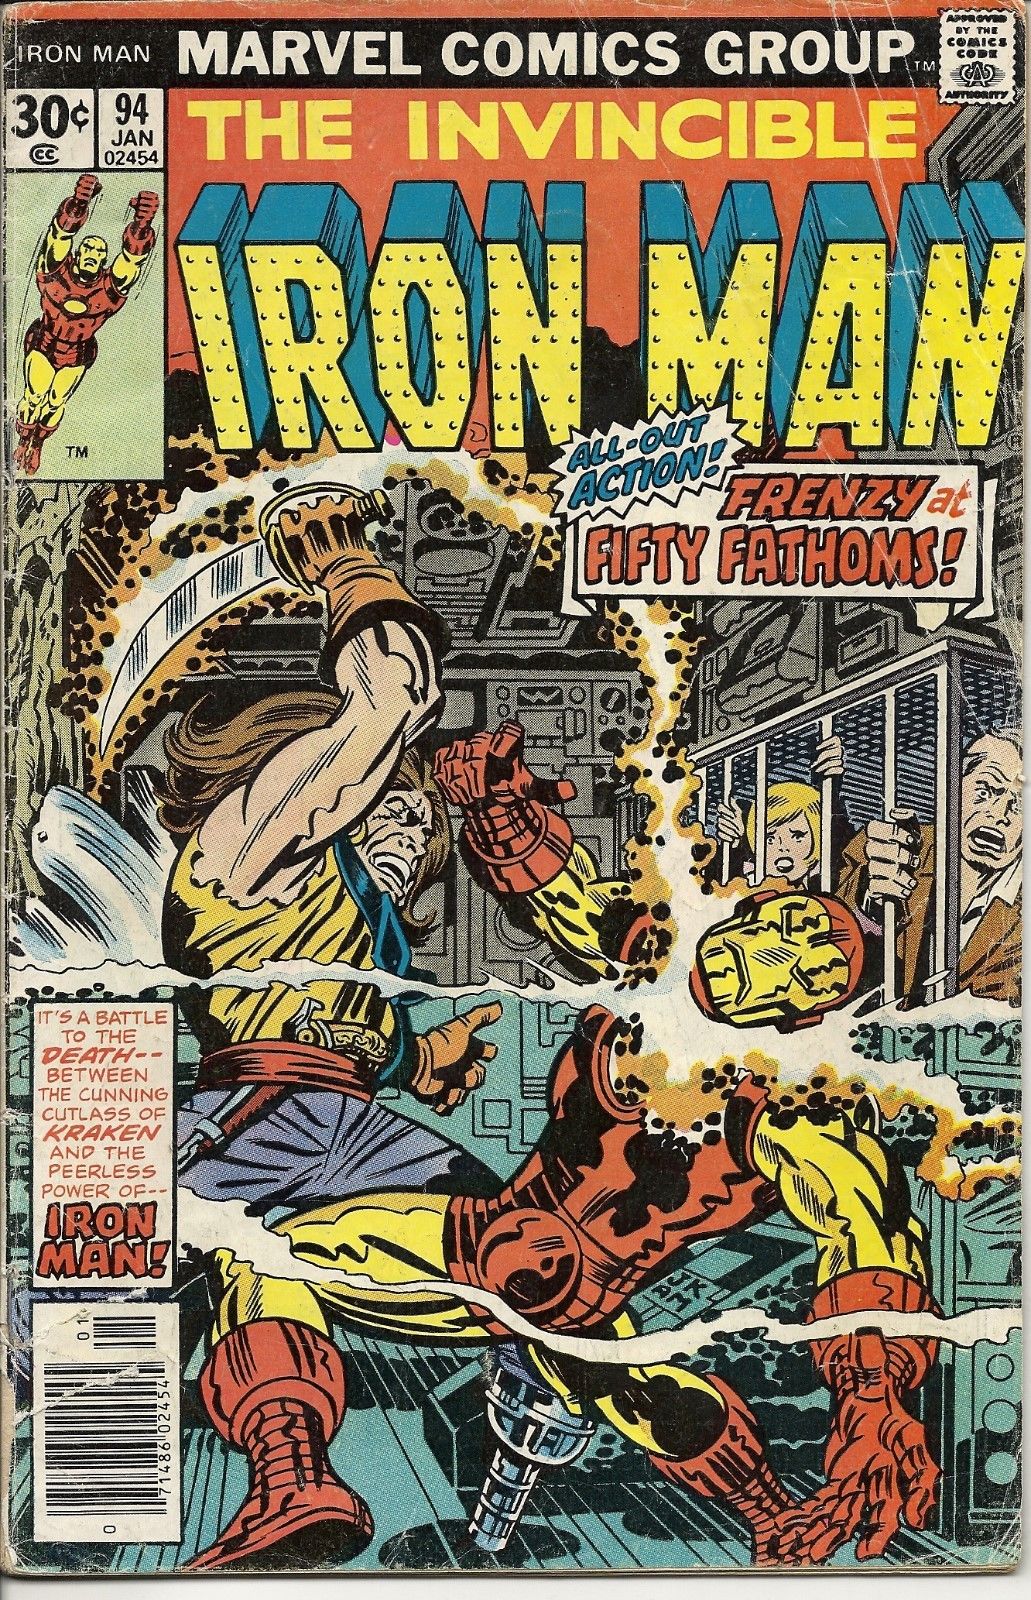 Marvel Illustrated: The Man In The Iron Mask #3